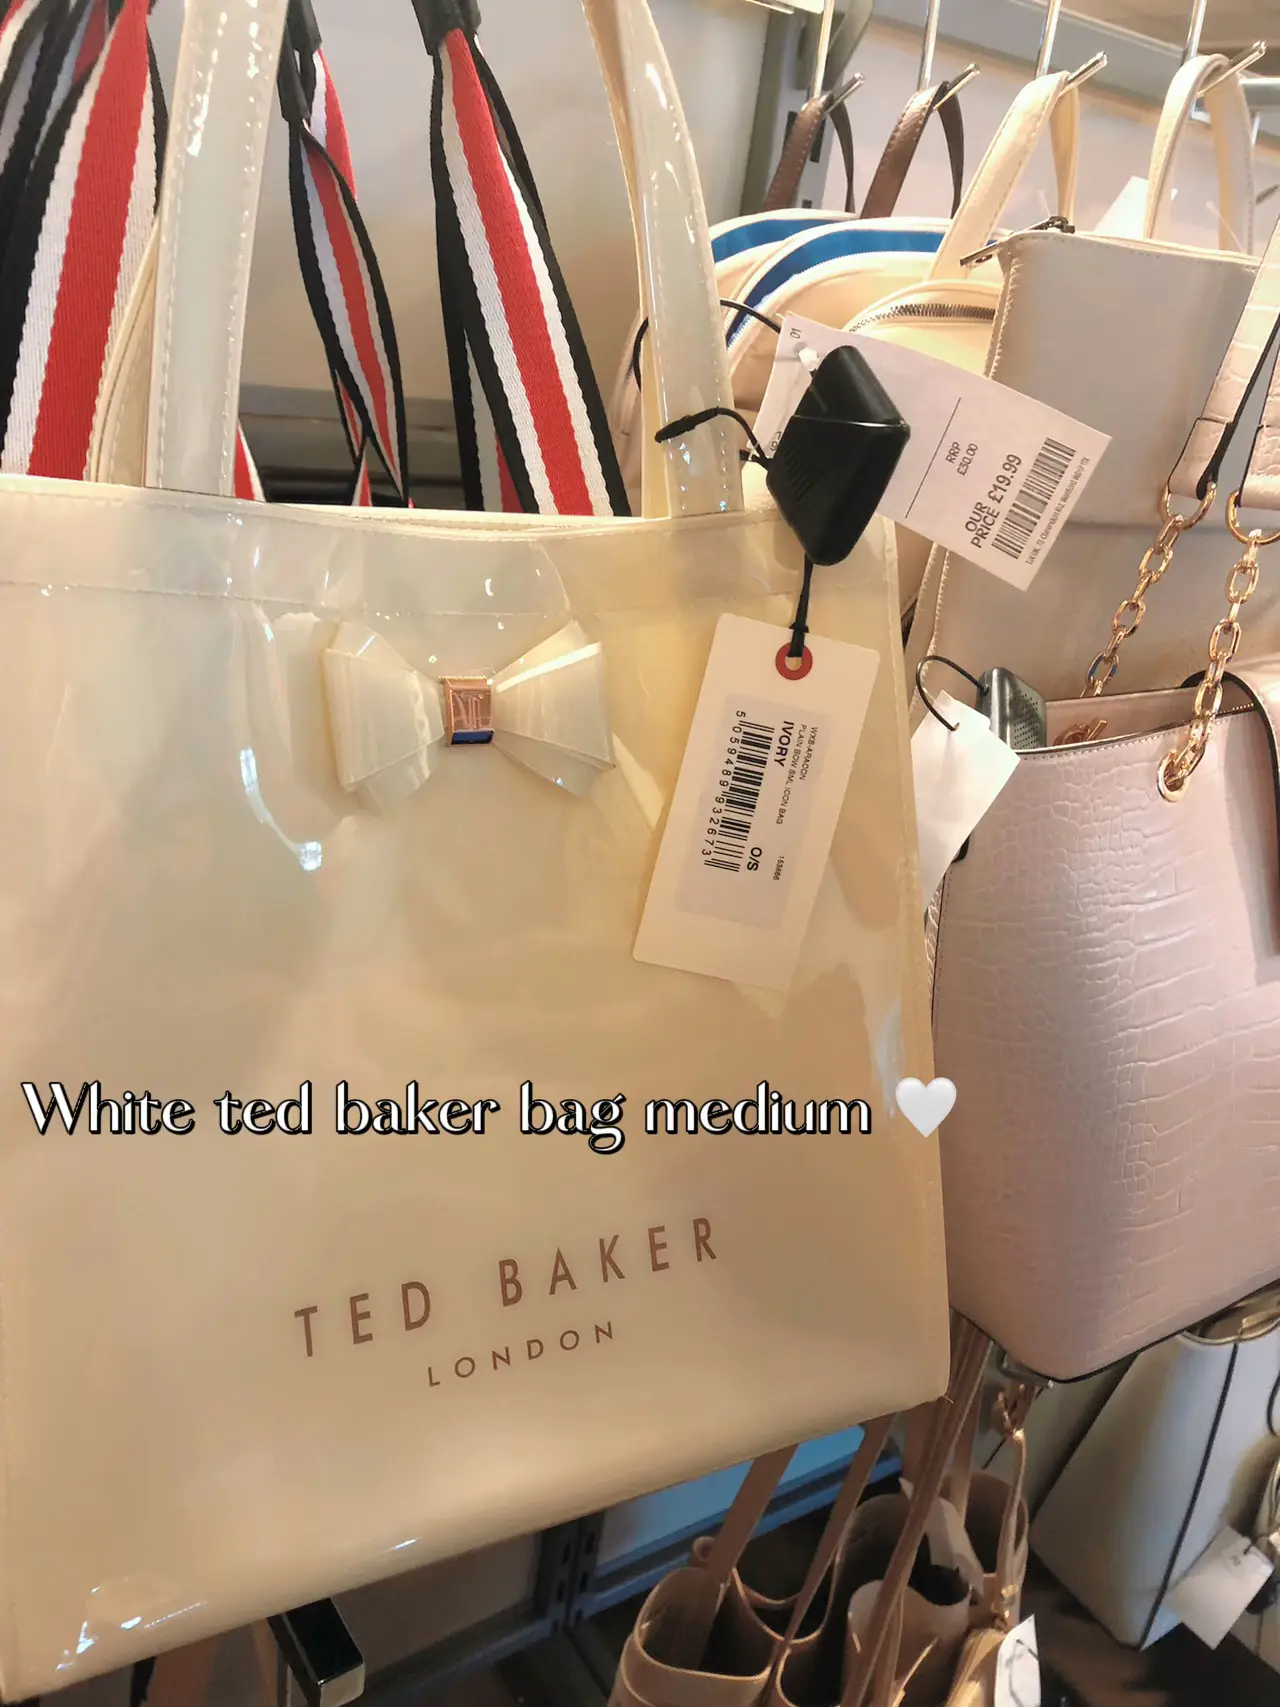 Ted Baker tote bags being sold in TKMaxx for a fraction of the